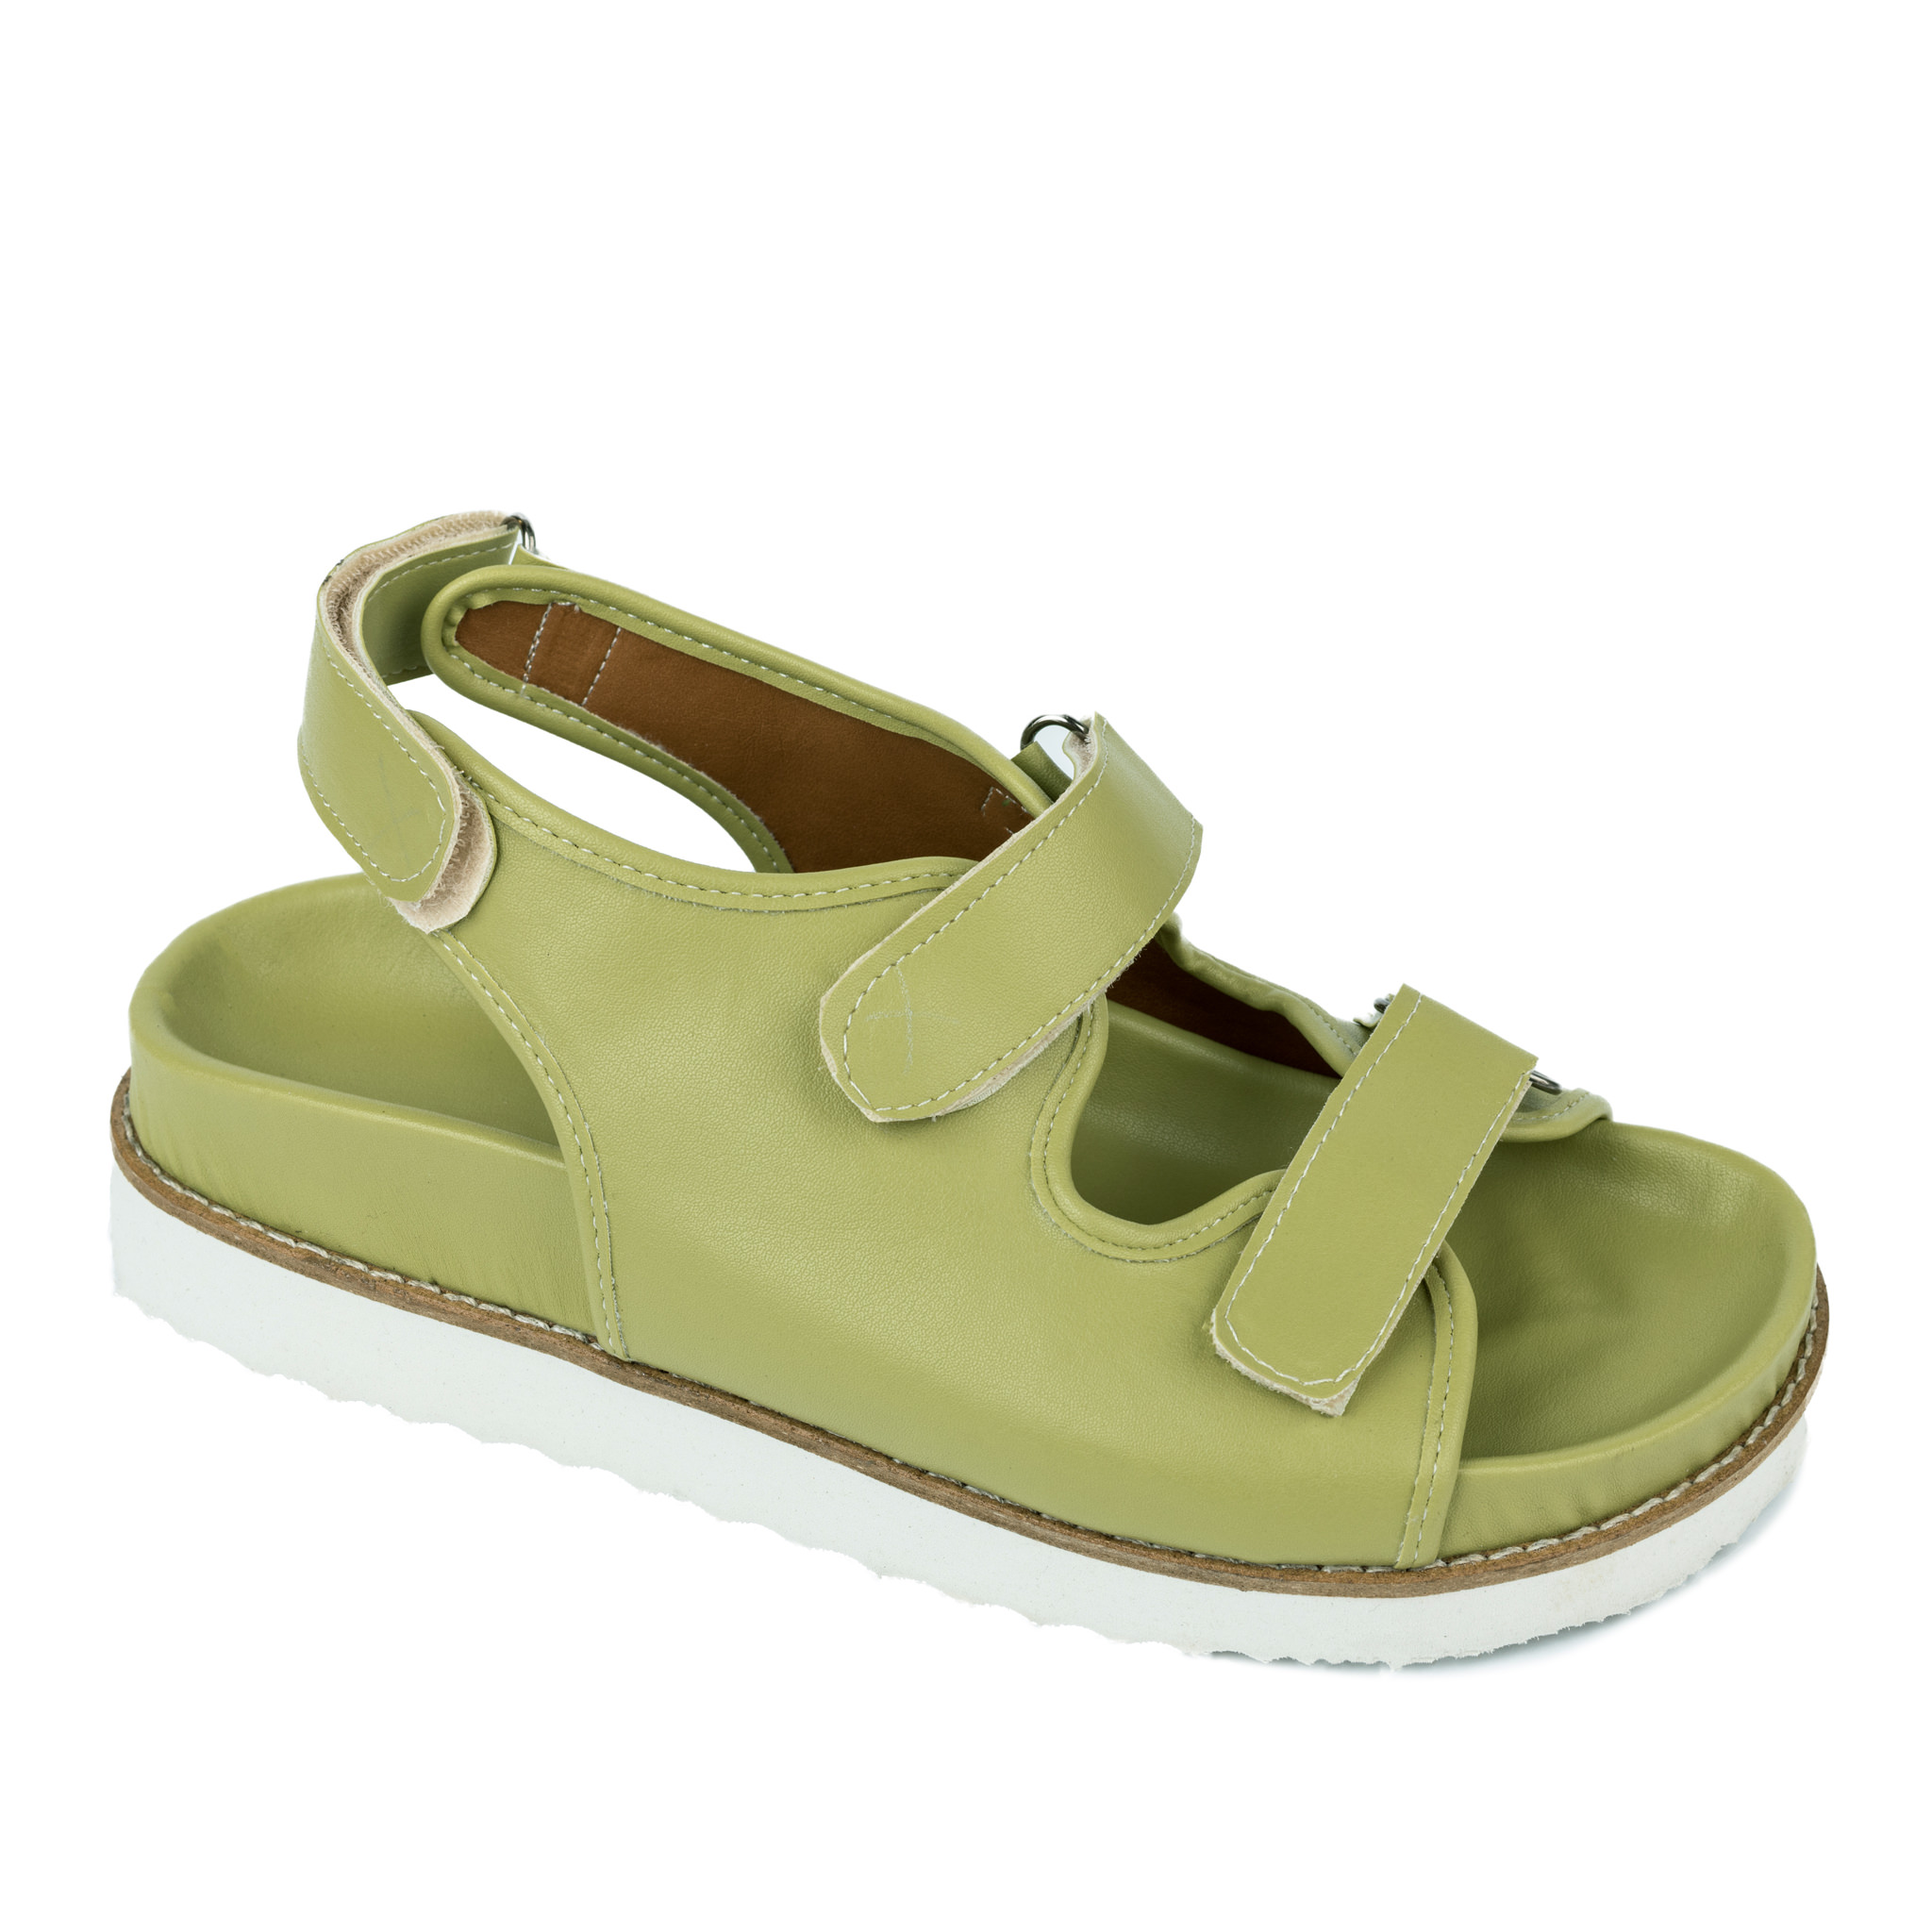 SPORT FLAT SANDALS WITH VELCRO BAND - GREEN